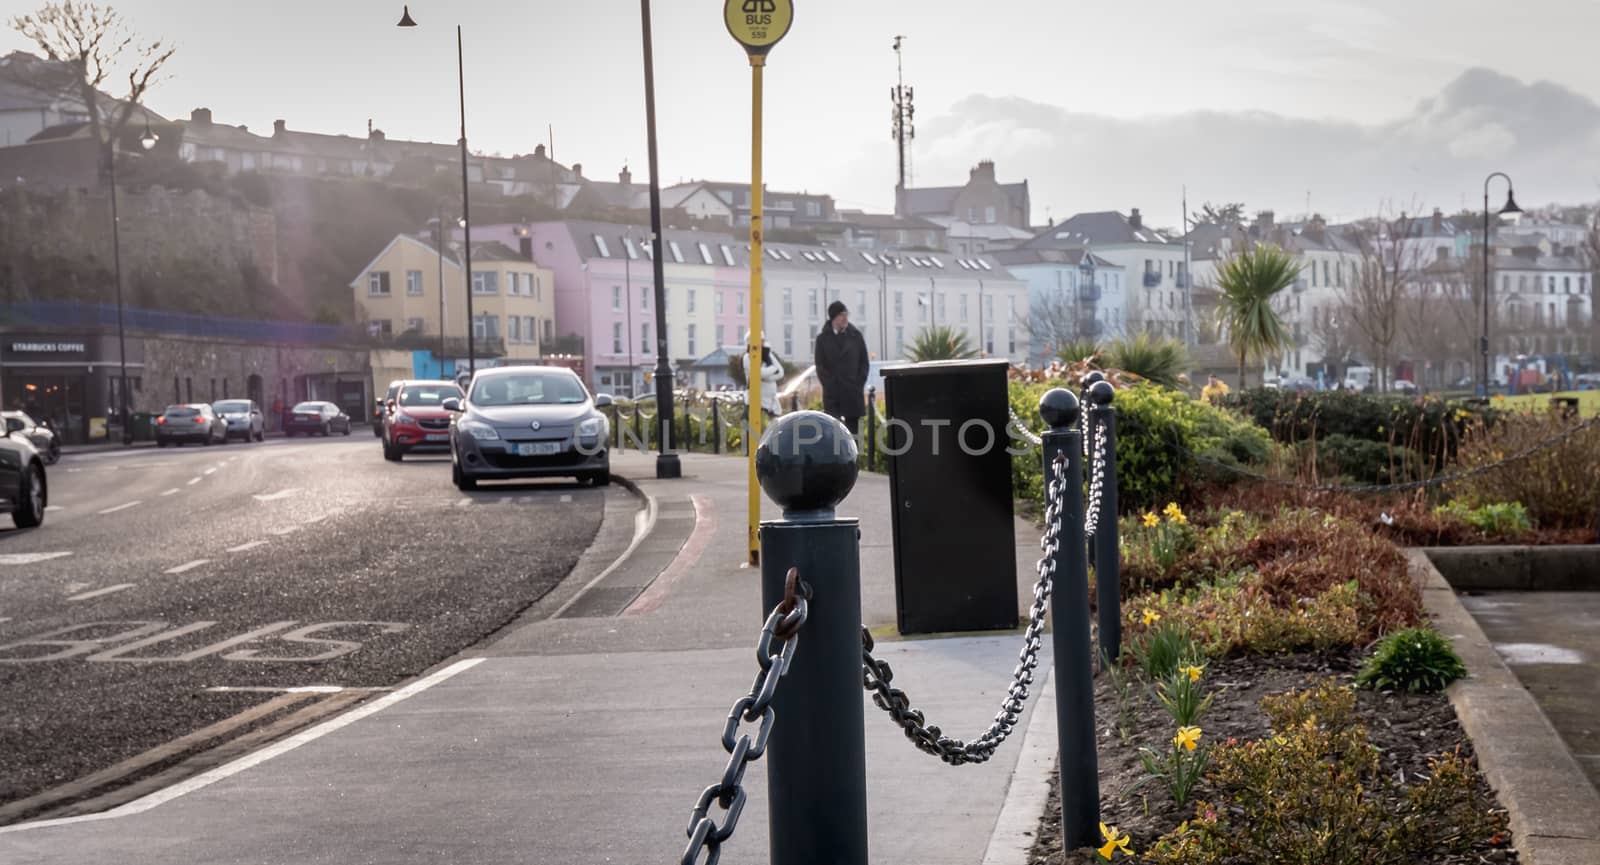 Howth, Ireland - February 15, 2019: people walking in the typical city center of a small fishing port near Dublin on a winter day